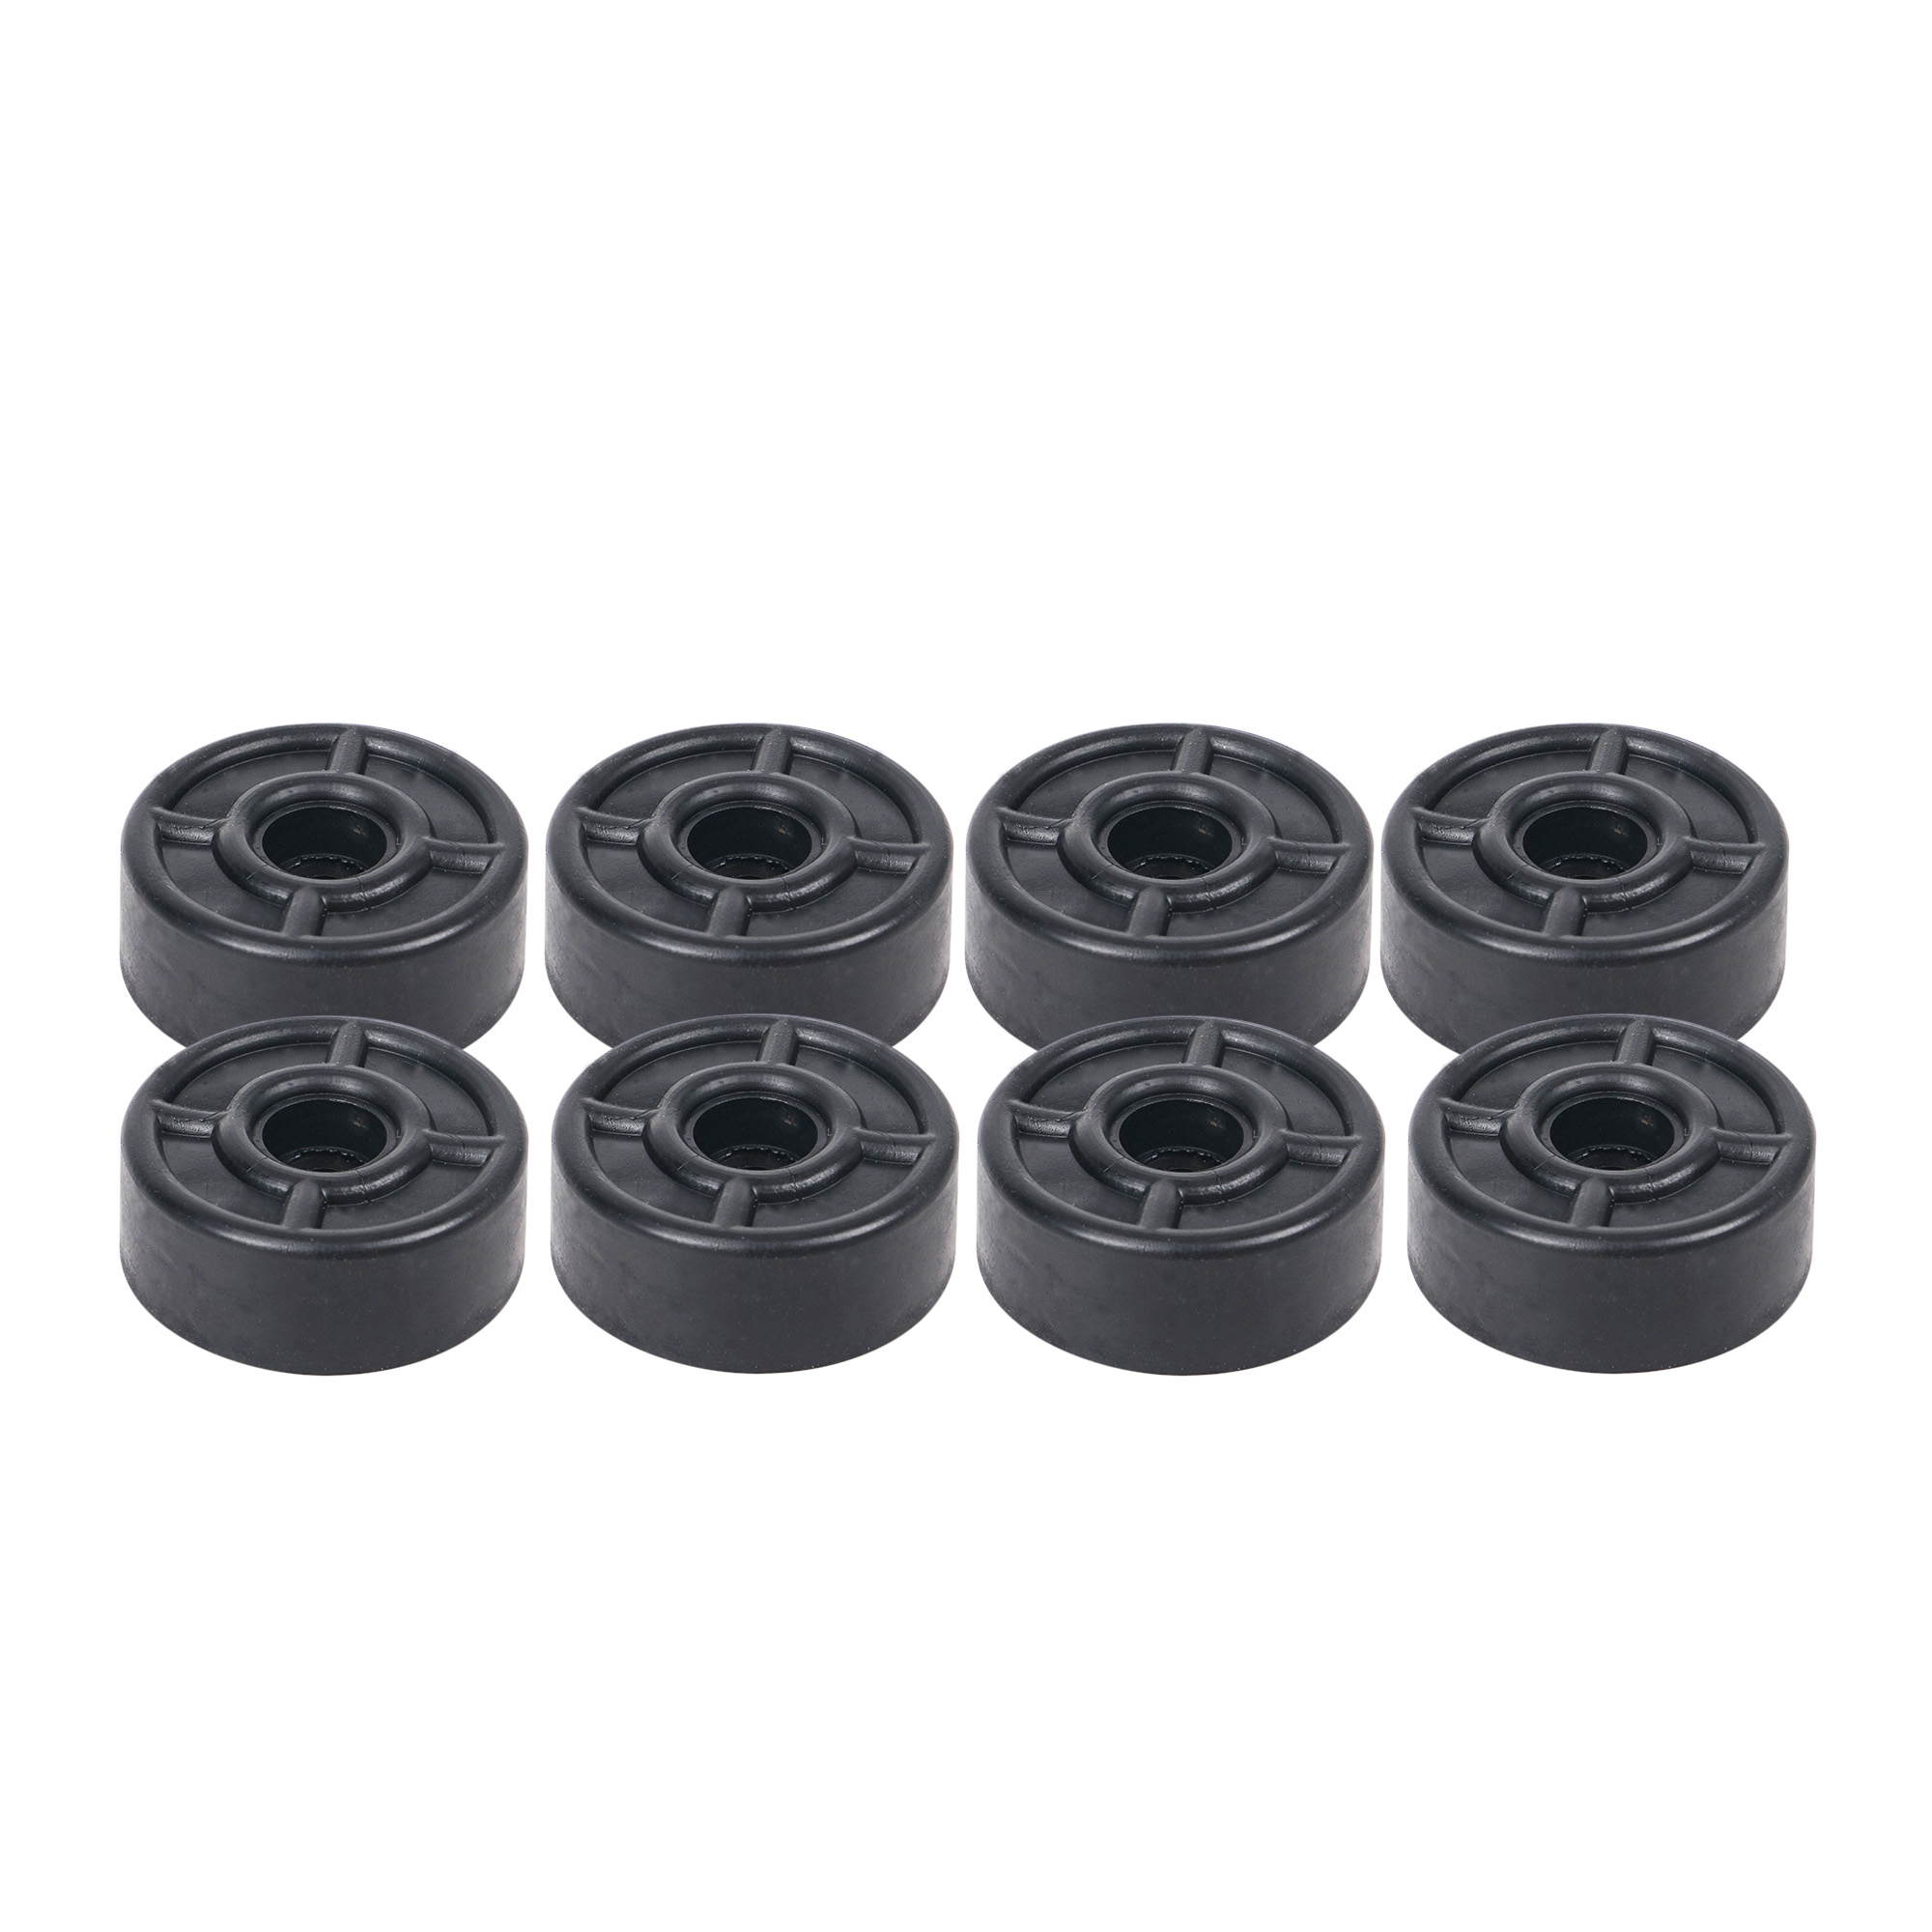 Sound Town 8-Pack Replacement Rubber Feet/Bumpers with Matching Screws, Heavy-Duty, Non Slip, for Flight Case, Speaker Cabinet, Amplifier and Subwoofer (ST-RHW-05) - image 2 of 3